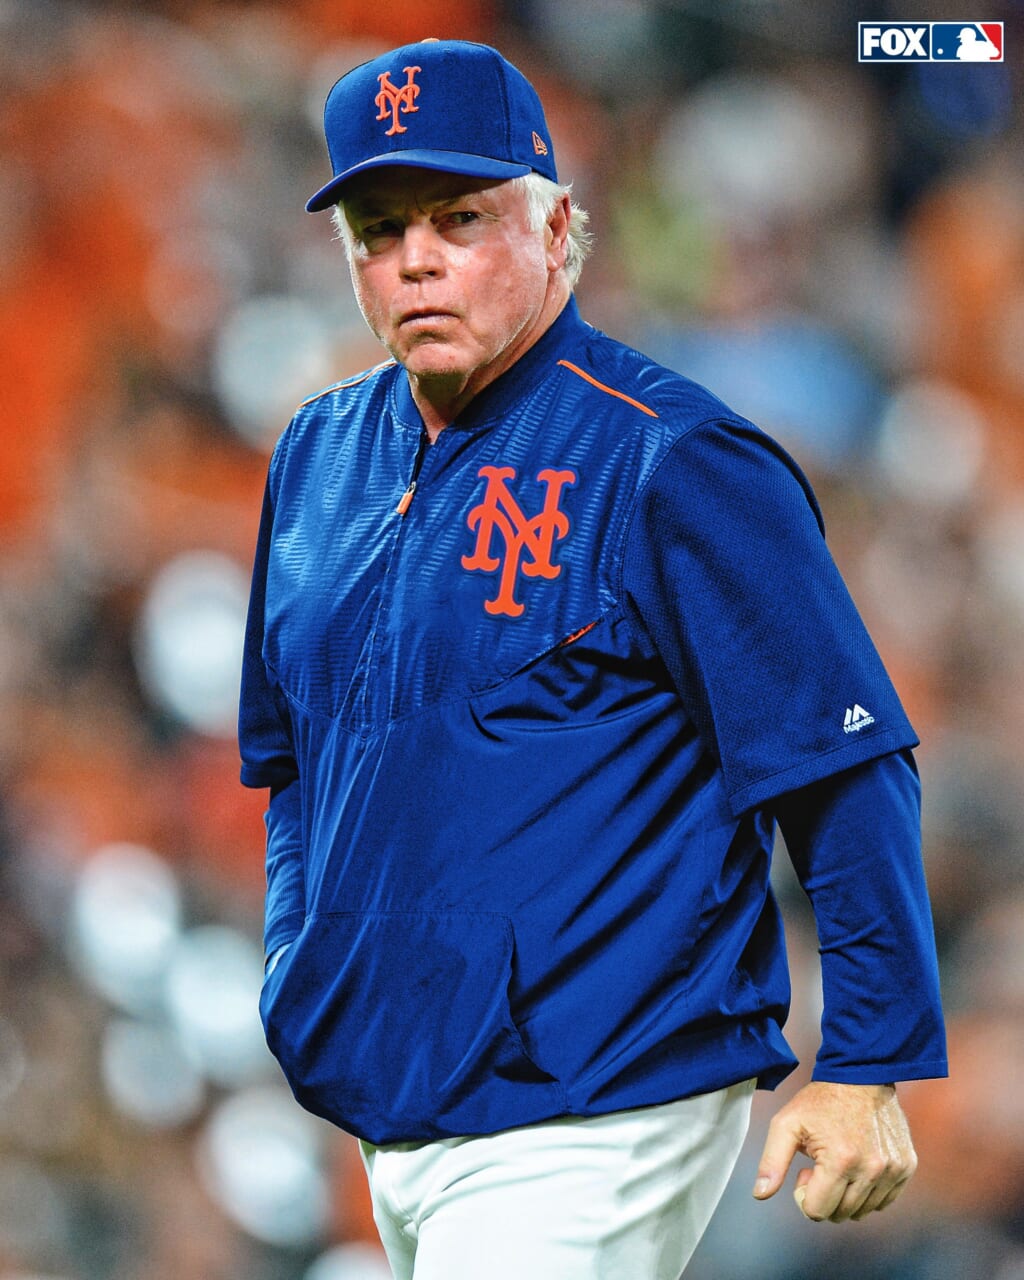 Mets manager Buck Showalter wants “concentration and effort” from his players